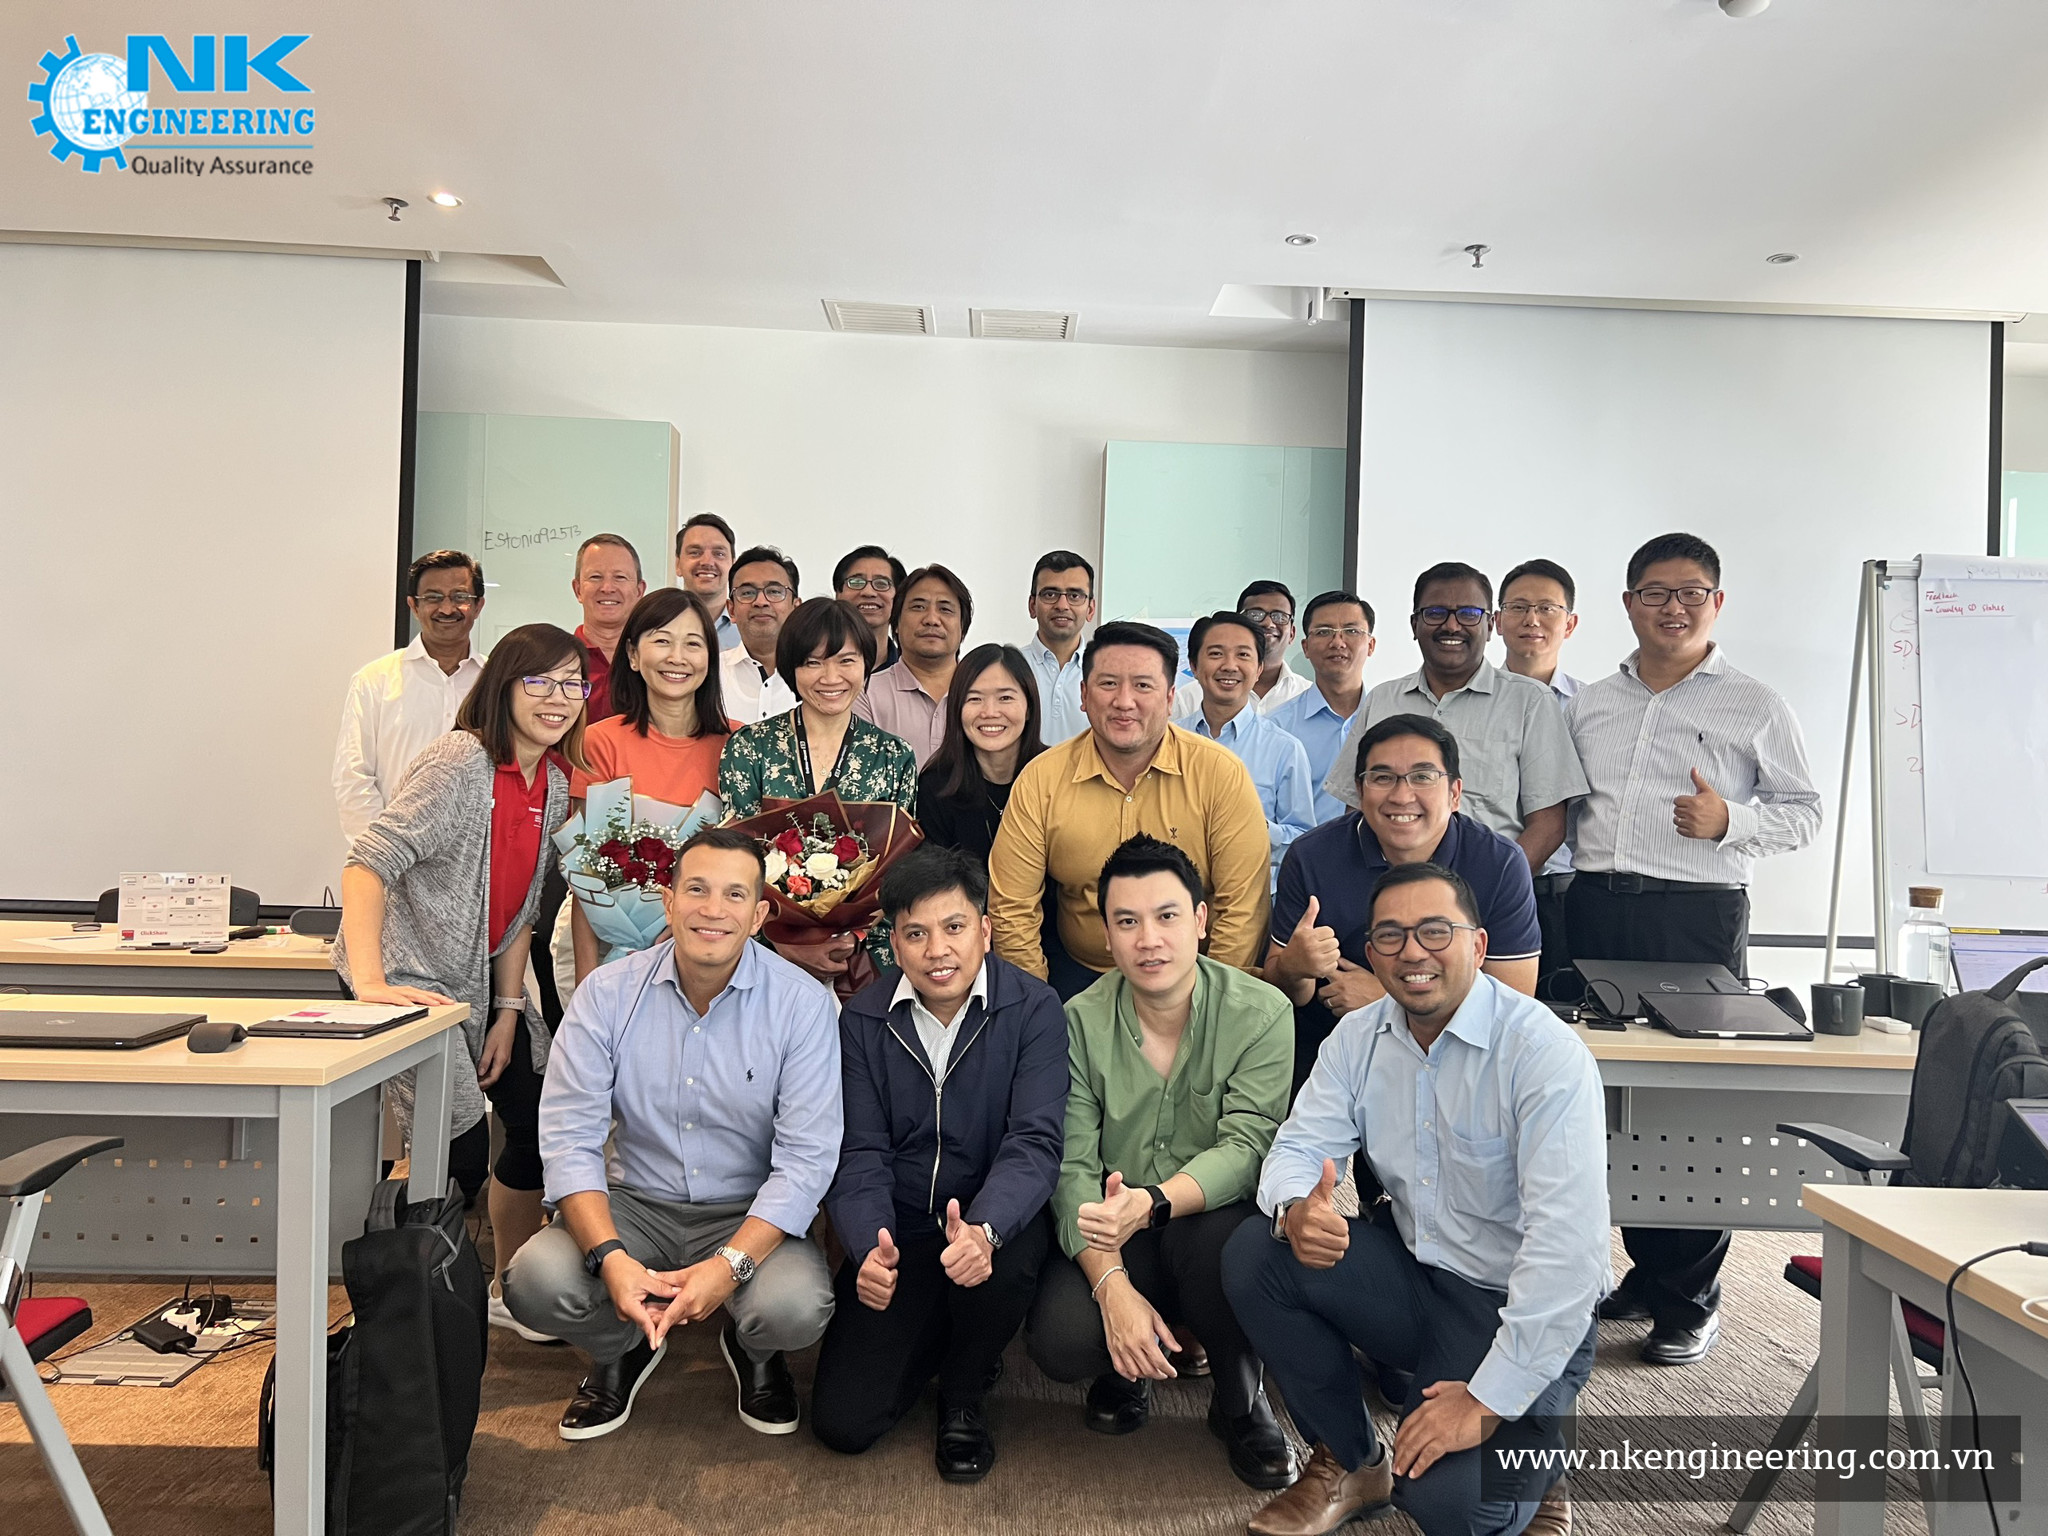 O&G Training and Asian Network Meeting at the E+H Malaysia office